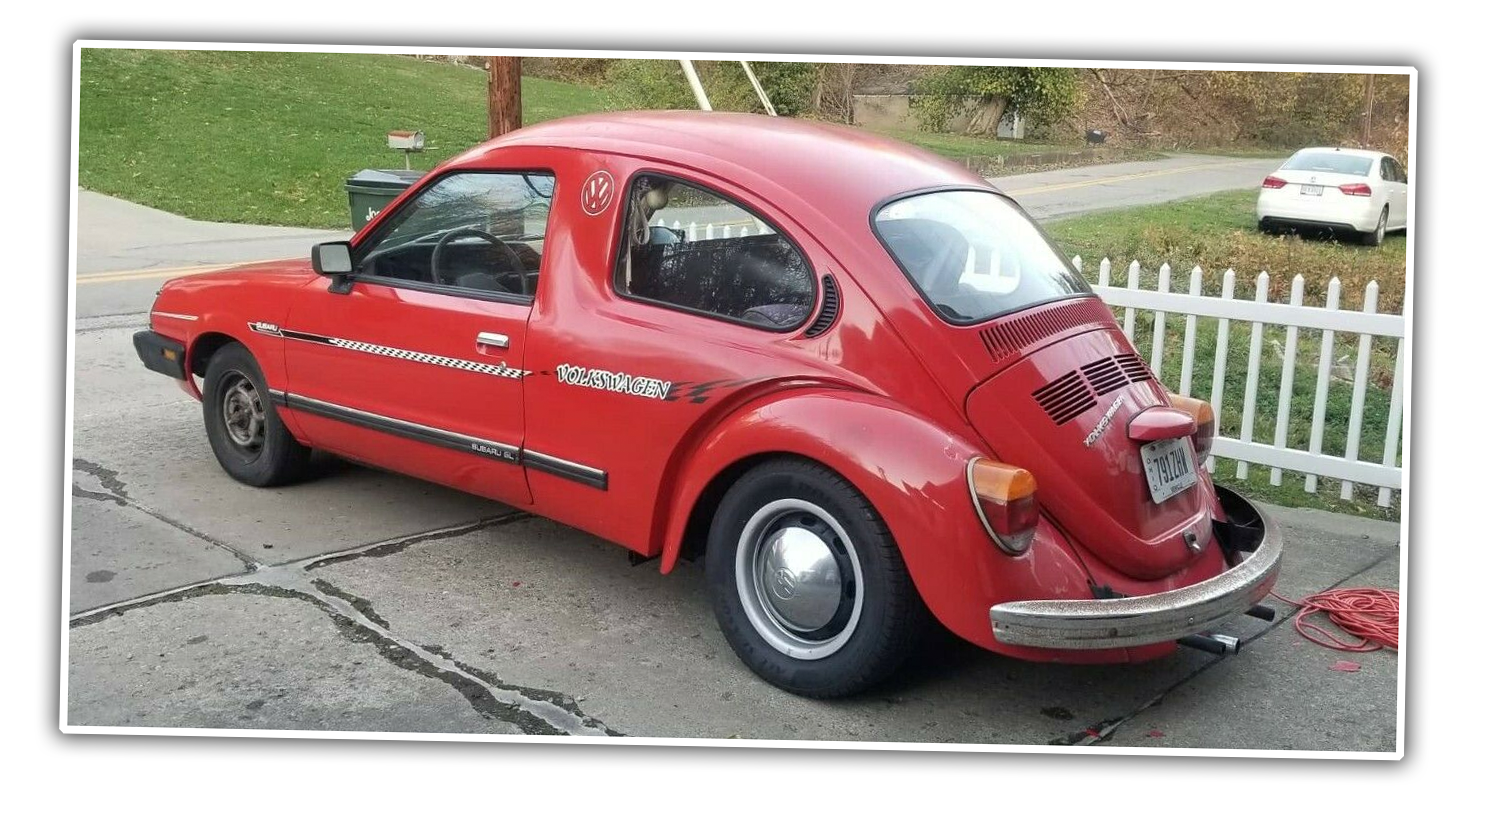 Time To Talk About That Bonkers Beetle/Subaru Mash-Up That’s Been Around Forever